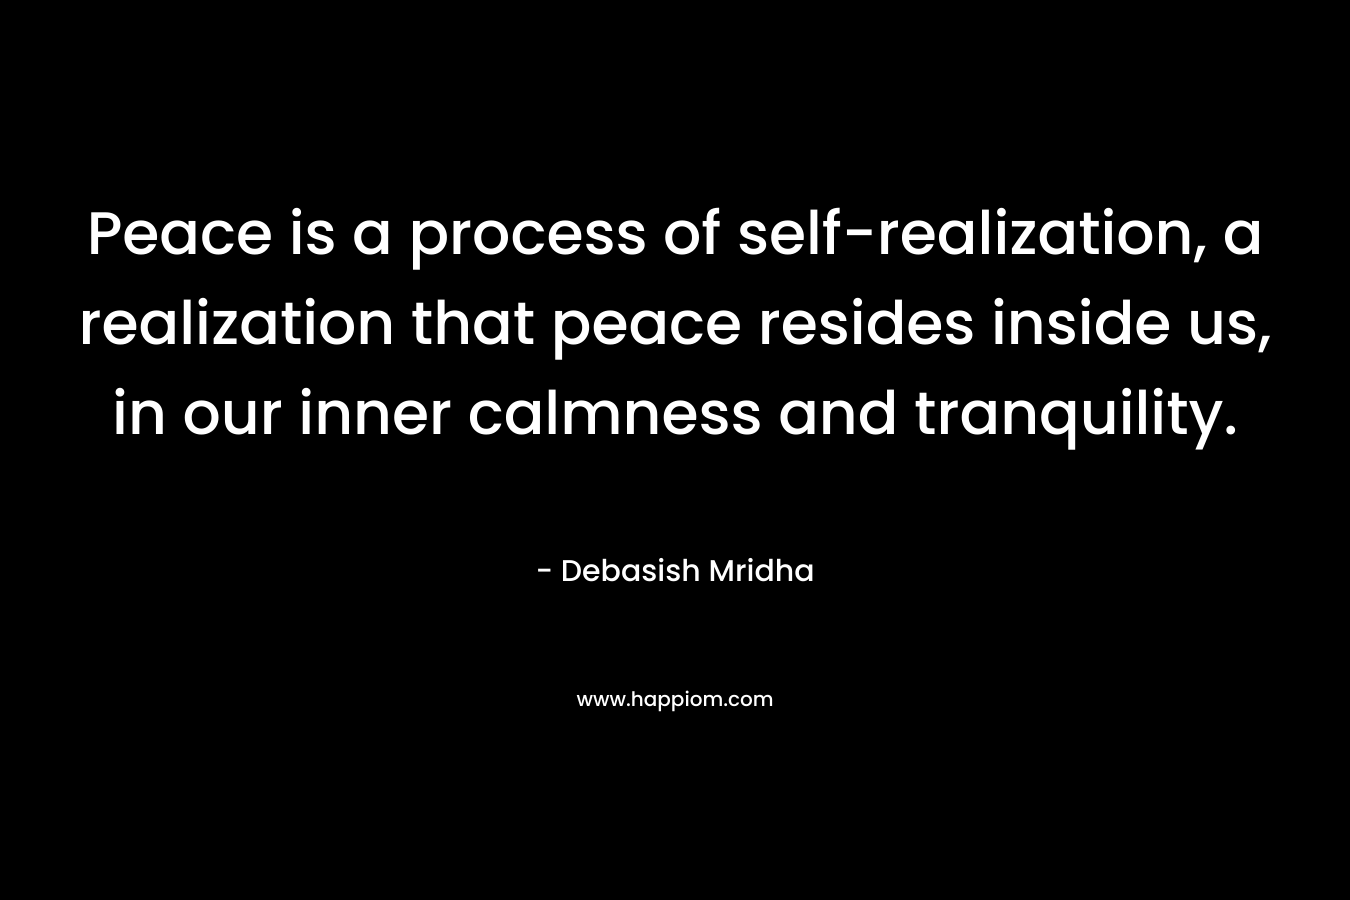 Peace is a process of self-realization, a realization that peace resides inside us, in our inner calmness and tranquility.